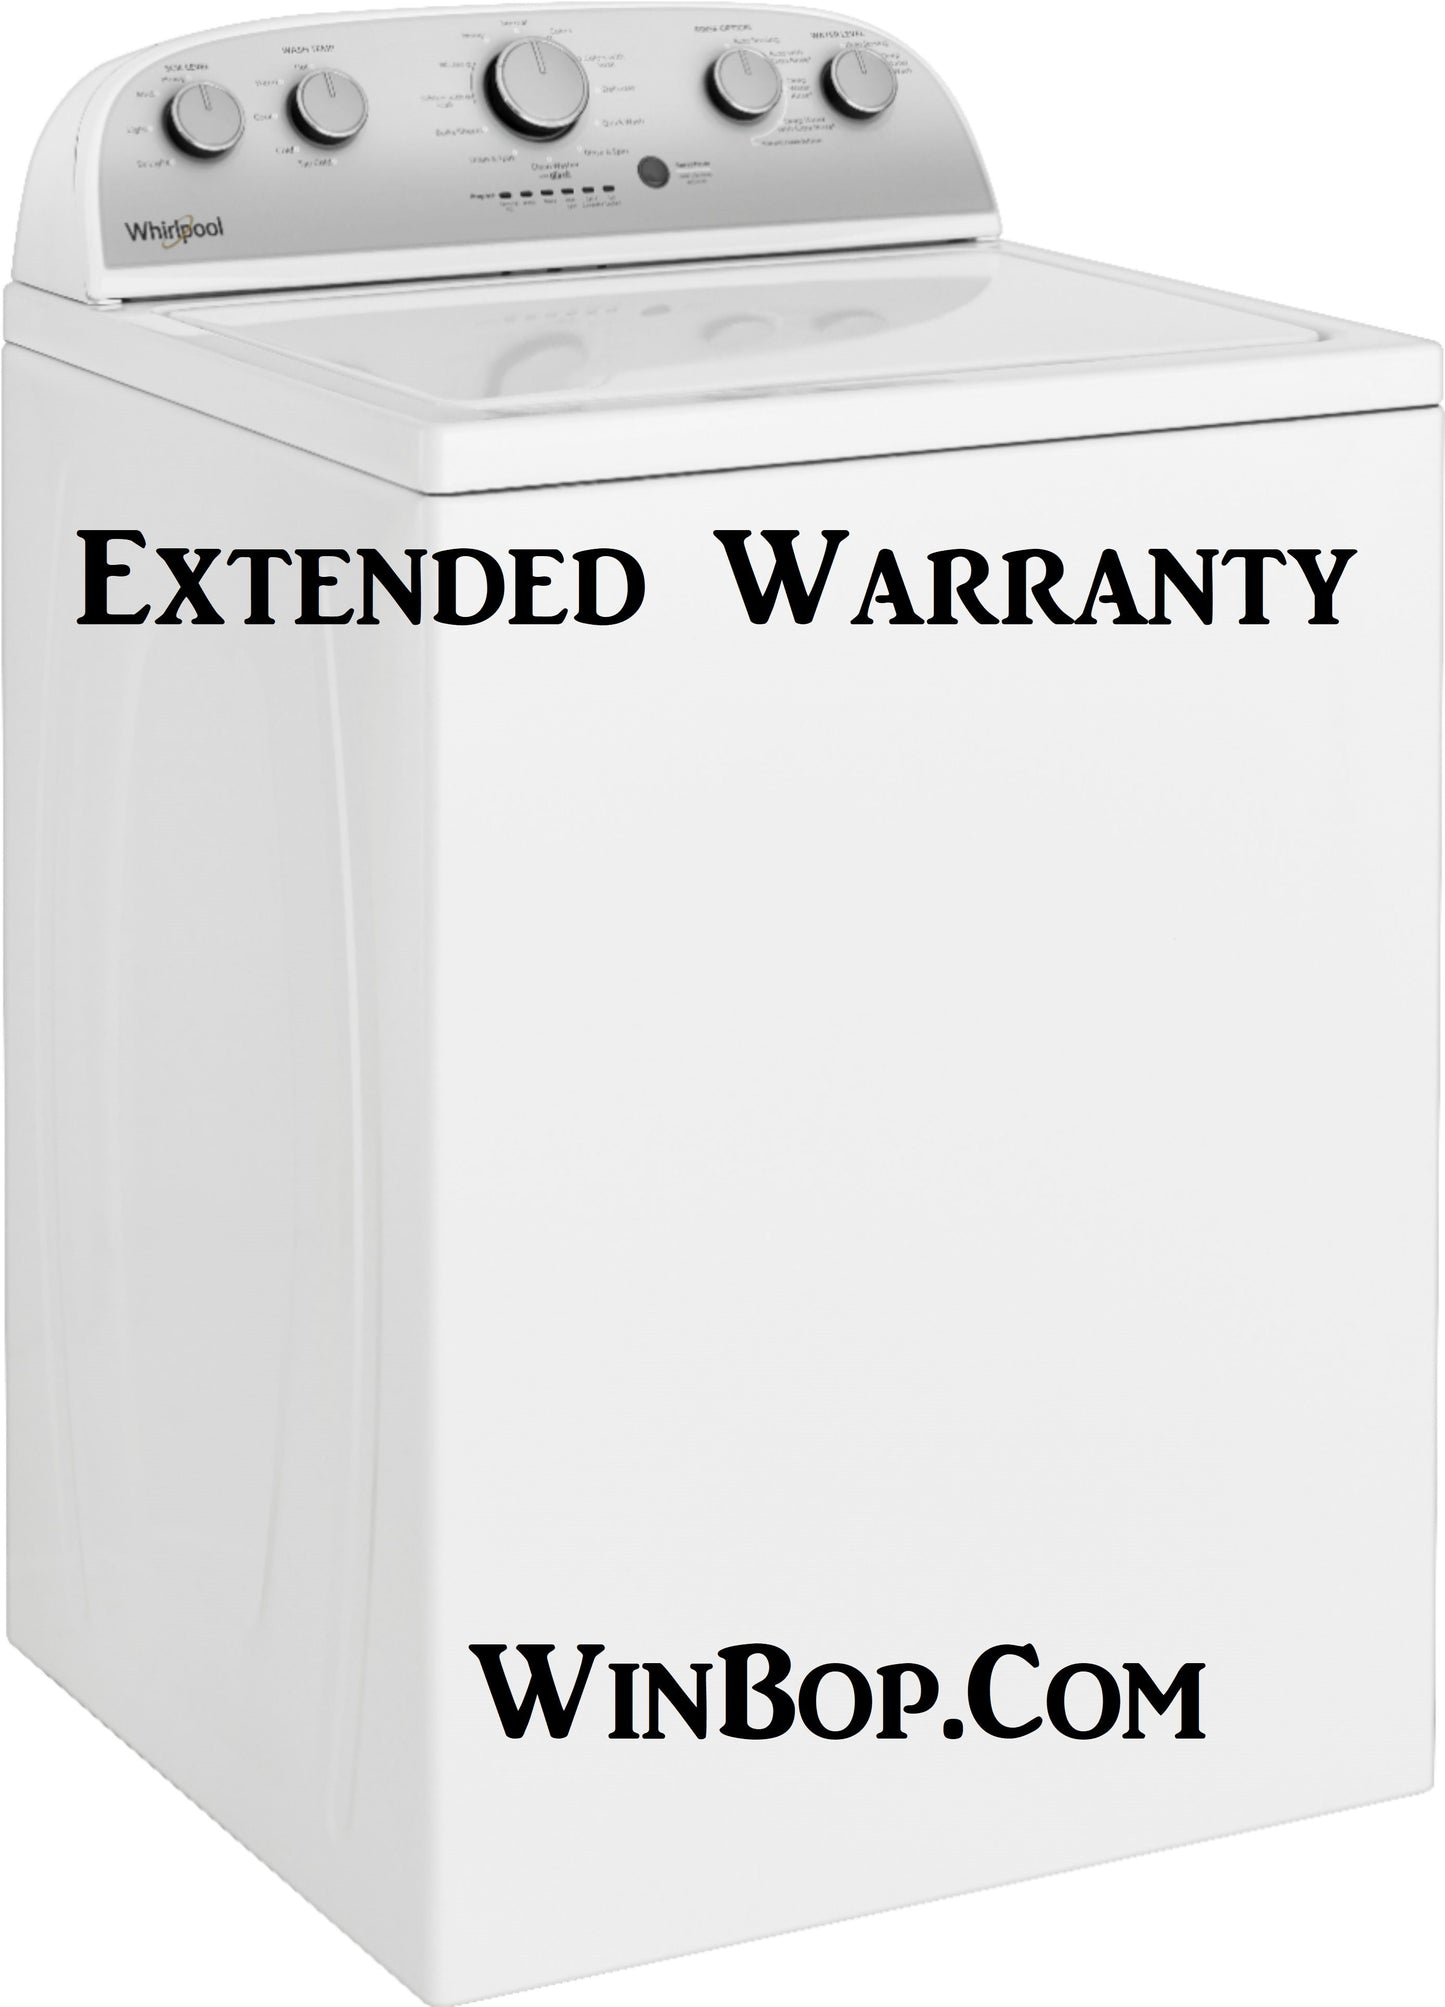 12 Month Extended Warranty on Washing Machines